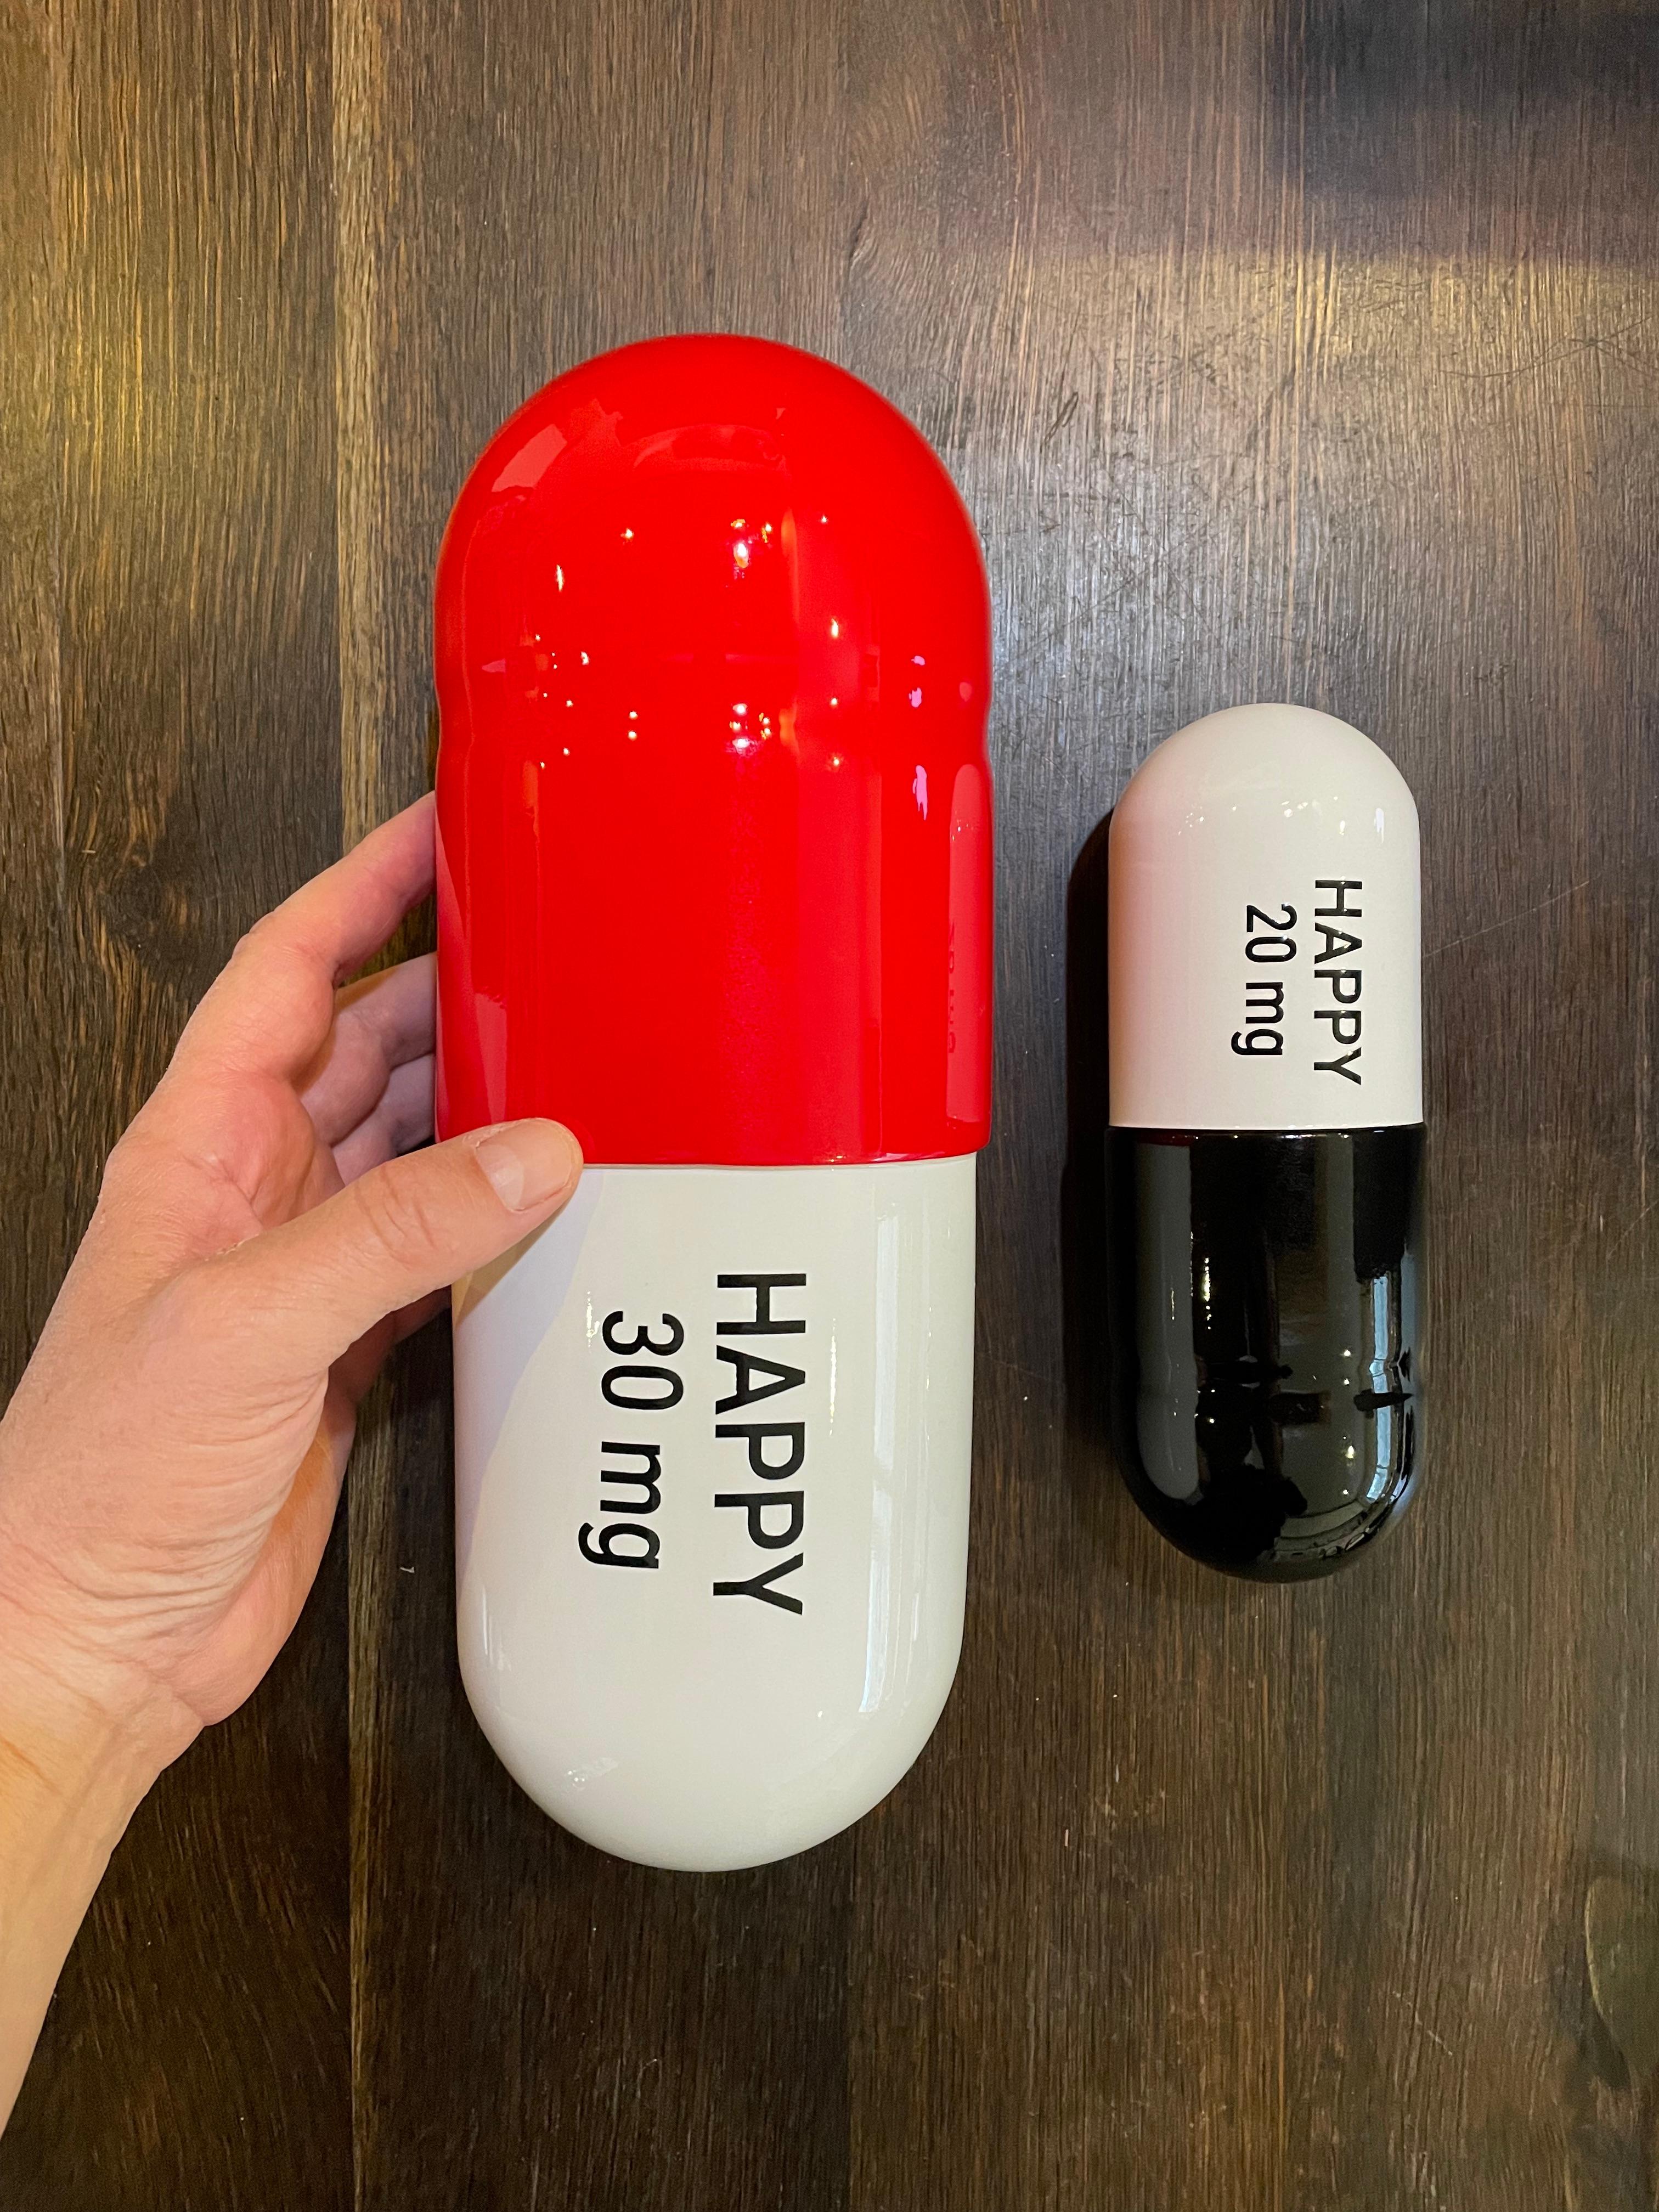 30 mg Large Happy pill (Red and White) - figurative sculpture 1